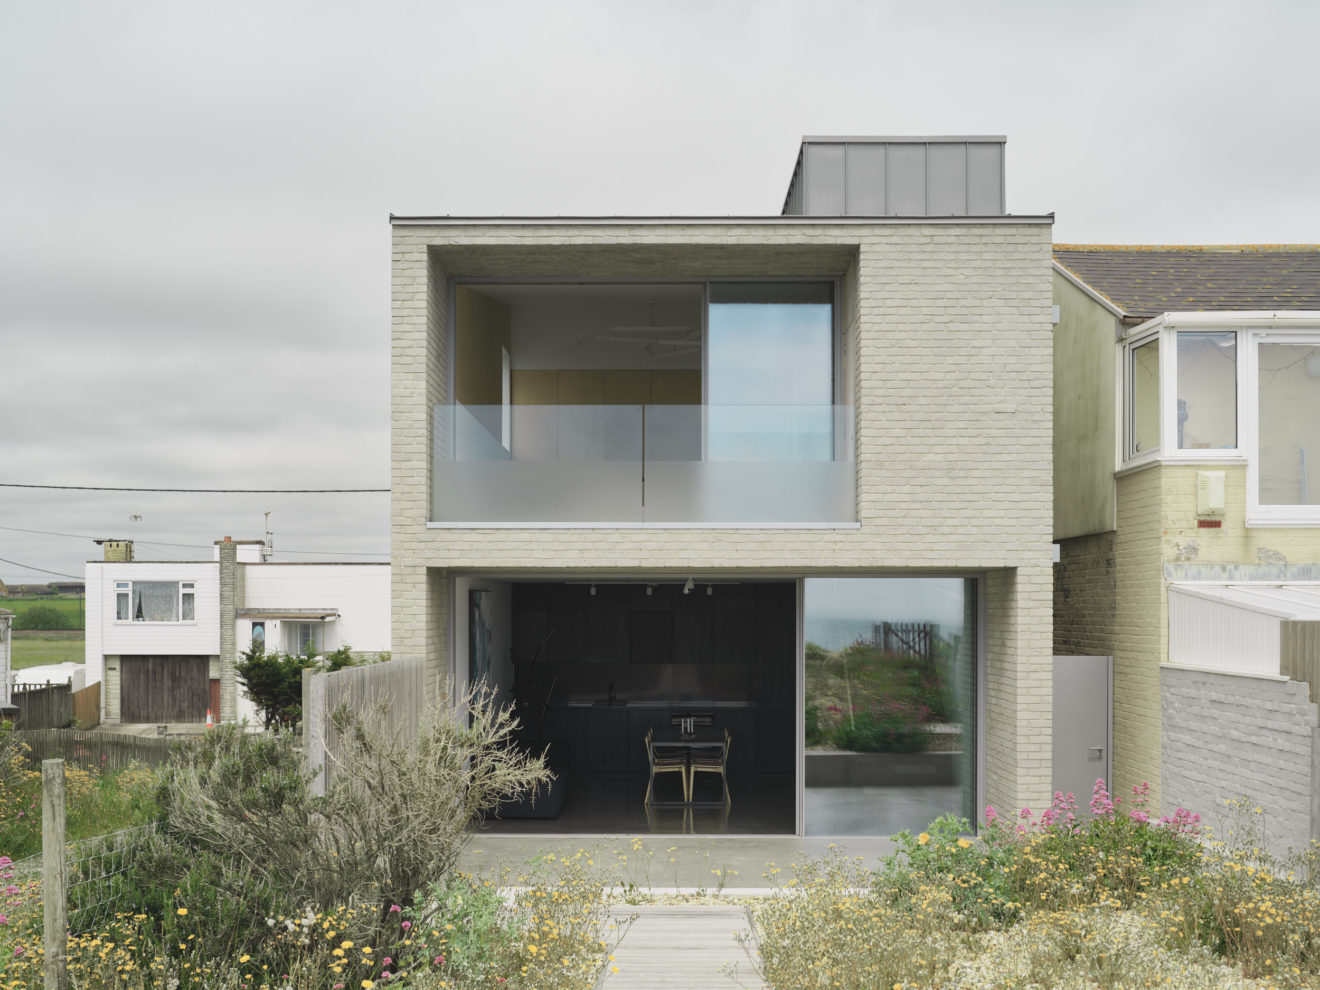 The Saltings by Raw Architecture Workshop. Photographed by Henry Woide.